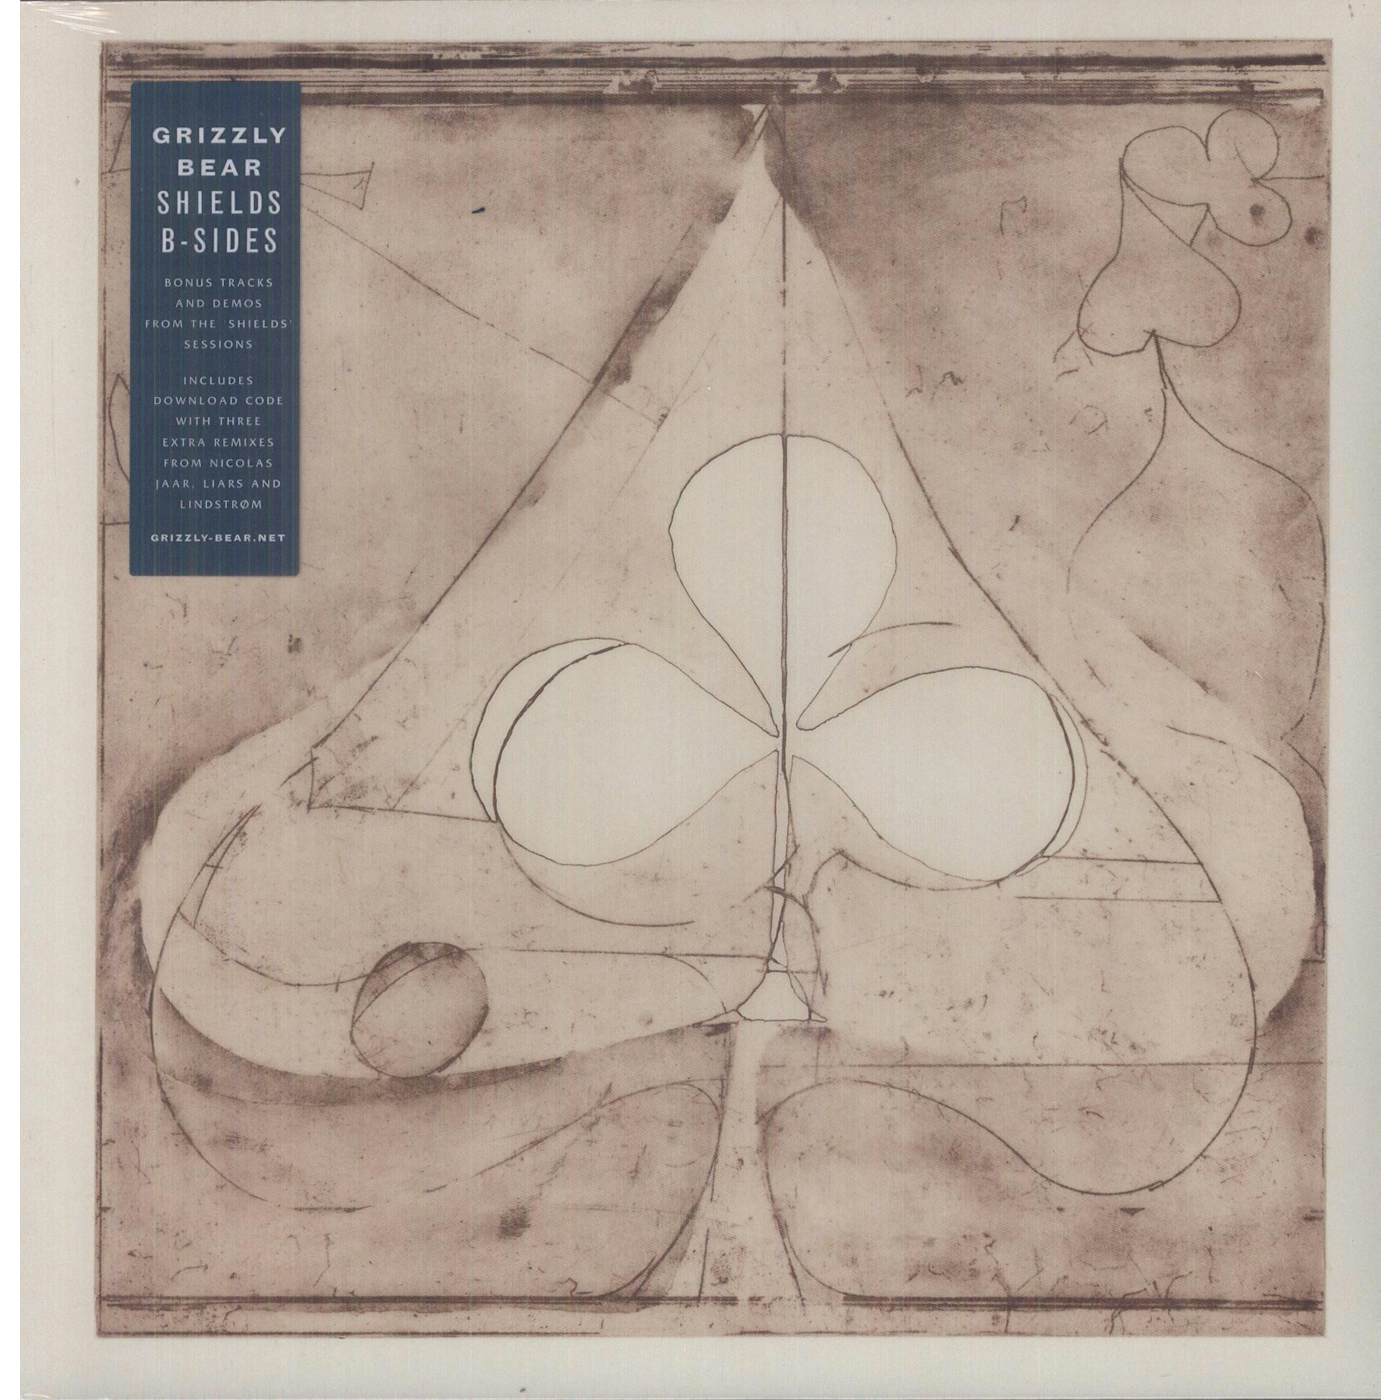 Grizzly Bear SHIELDS: ADDITIONS Vinyl Record